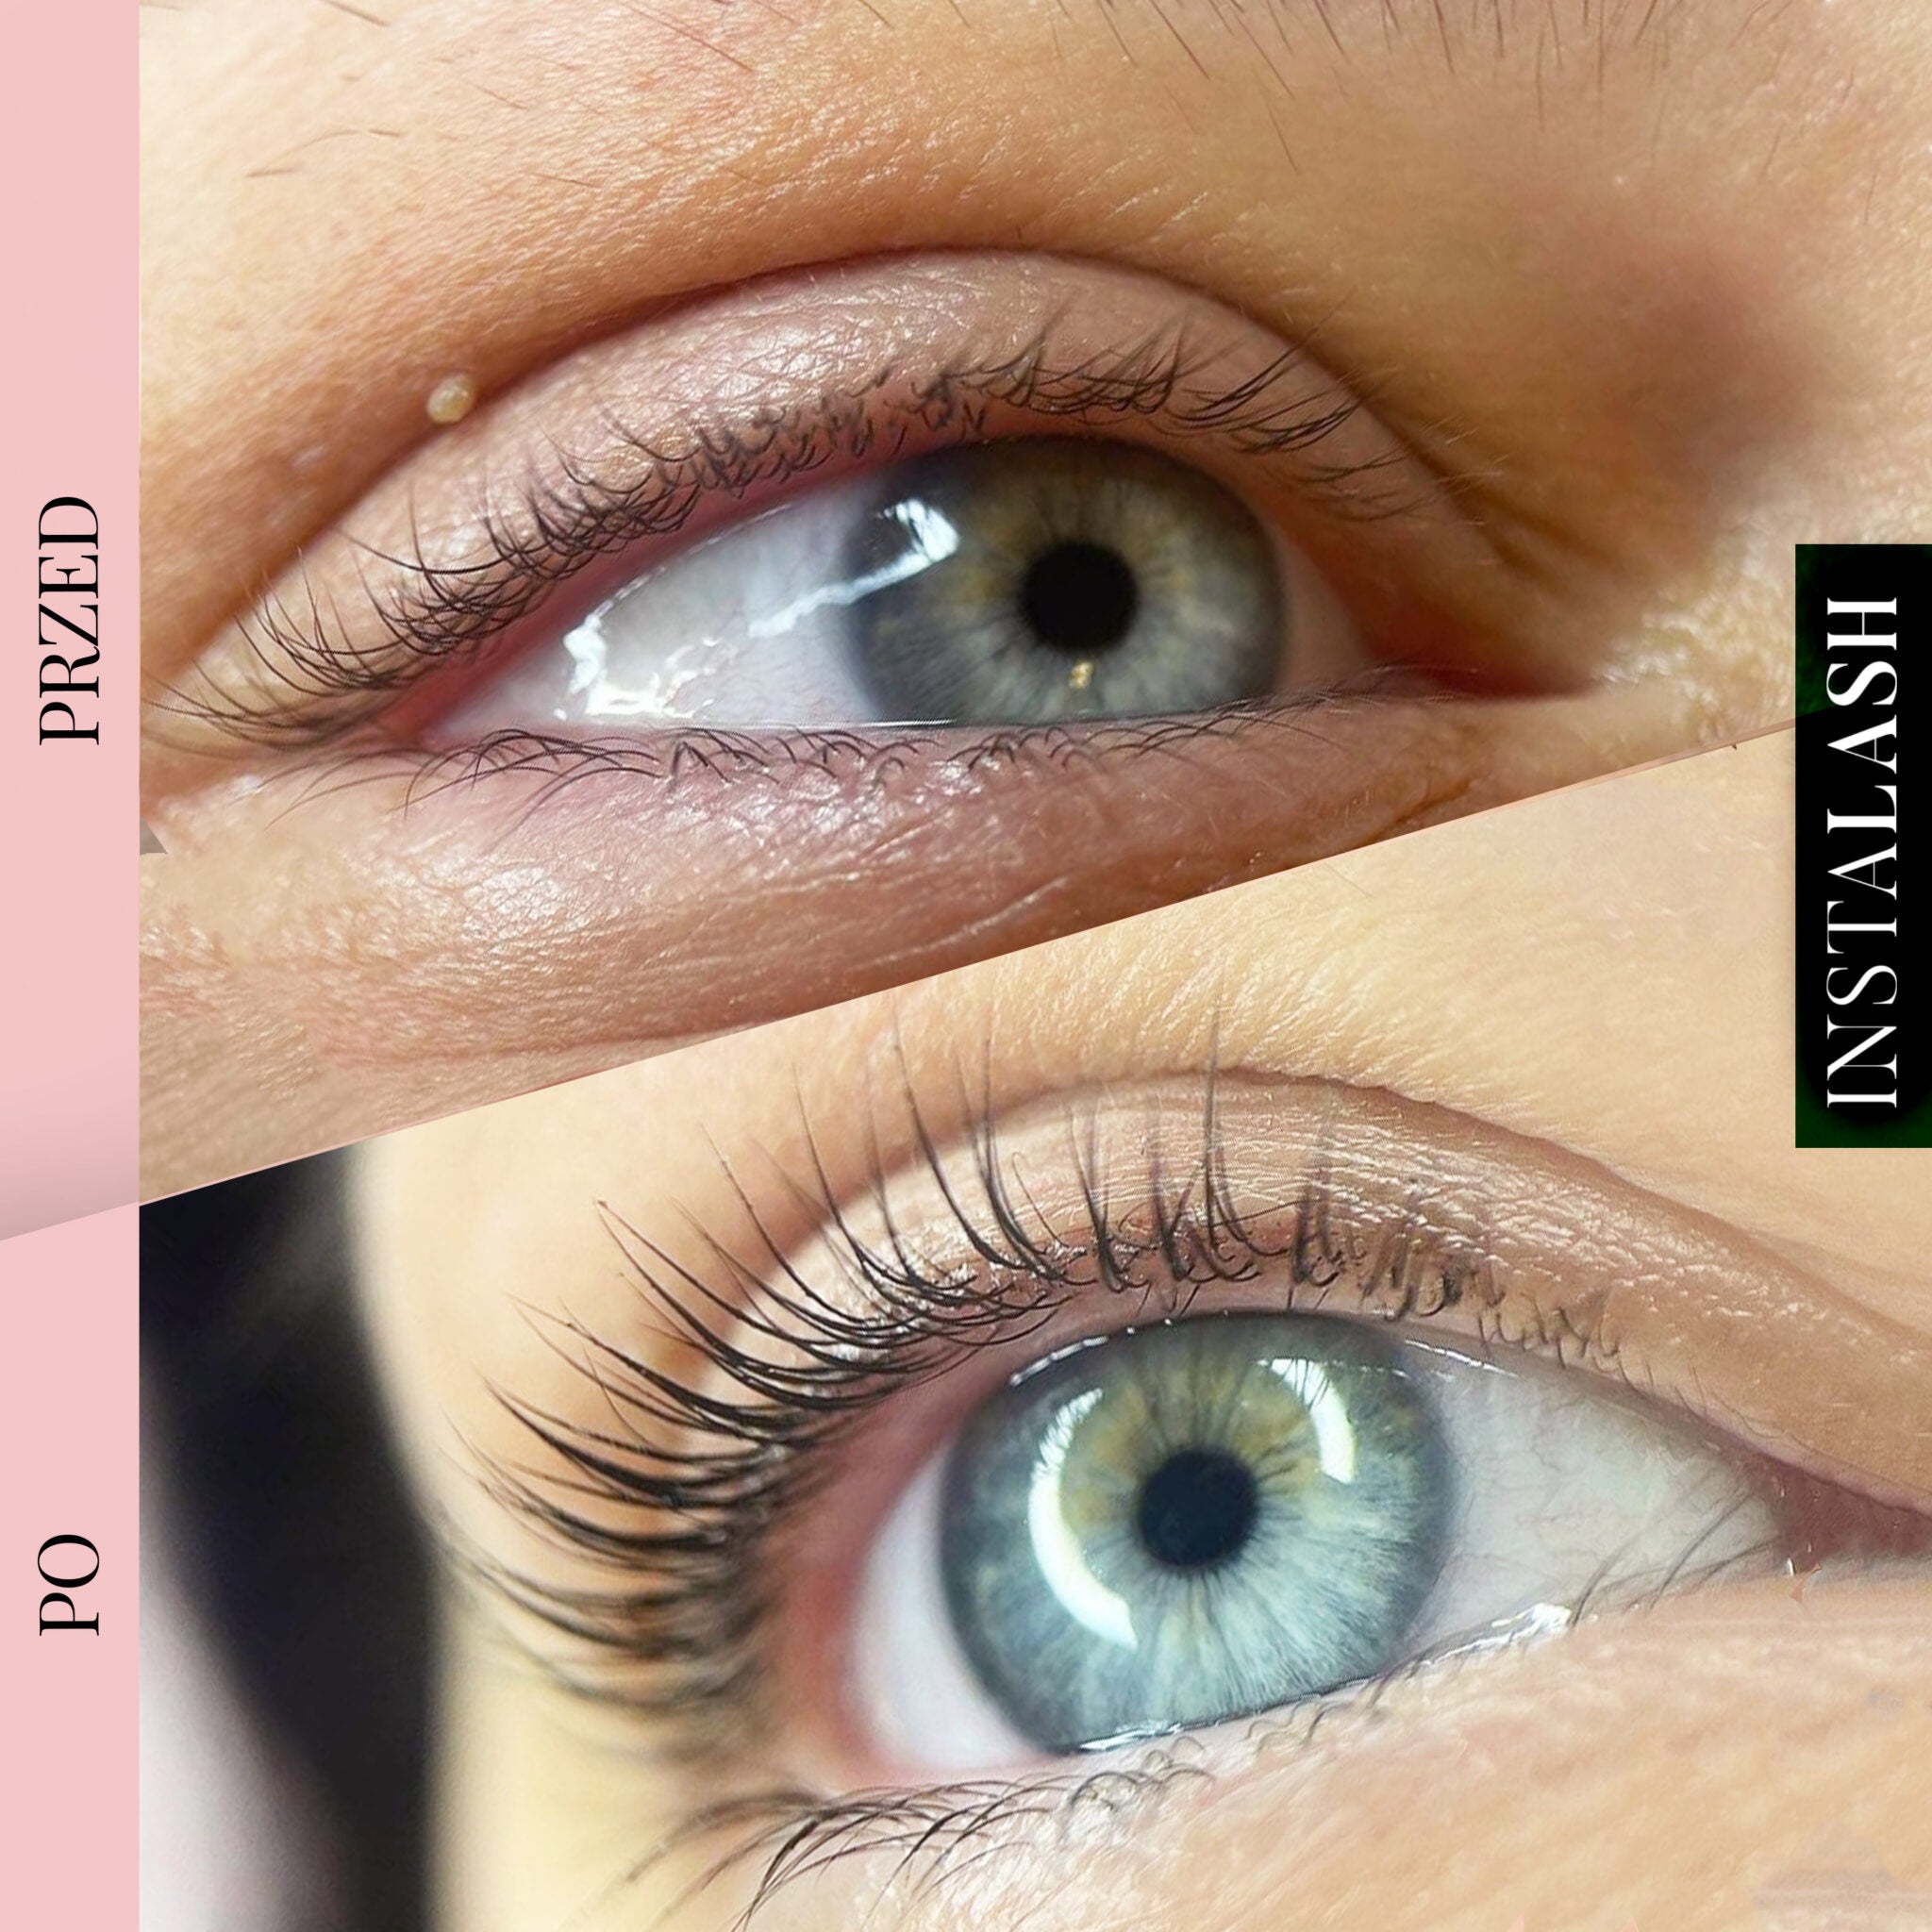 Before and after using Instalash LashBOOST SERUM – Lash &amp; Brow Growth &amp; Conditioning Serum